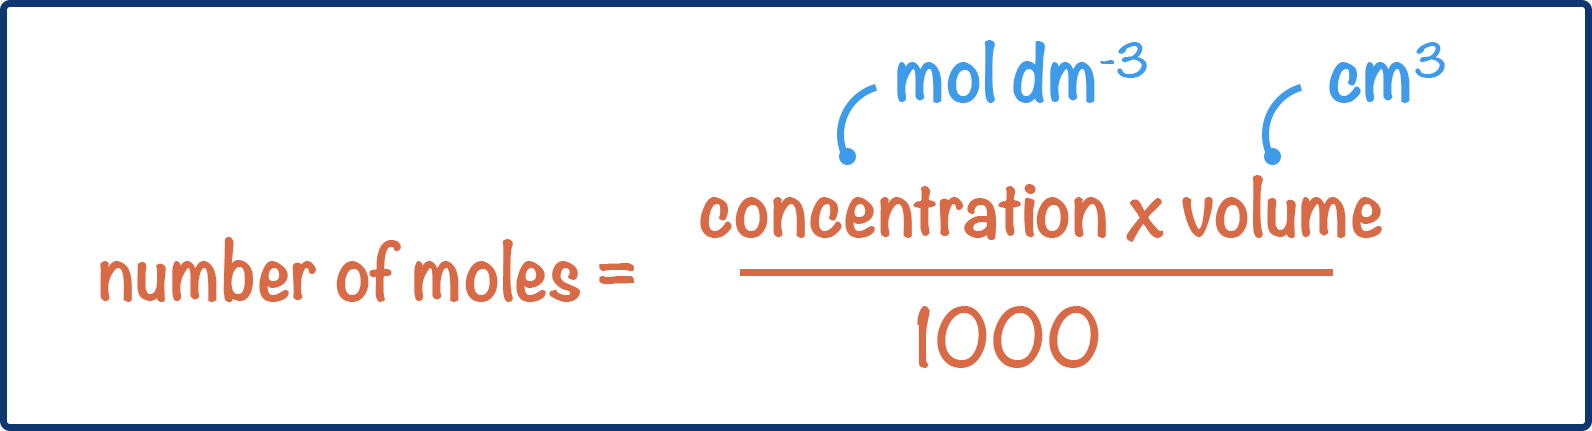 equation for calculating moles from concentration and volume converting cm3 to dm3